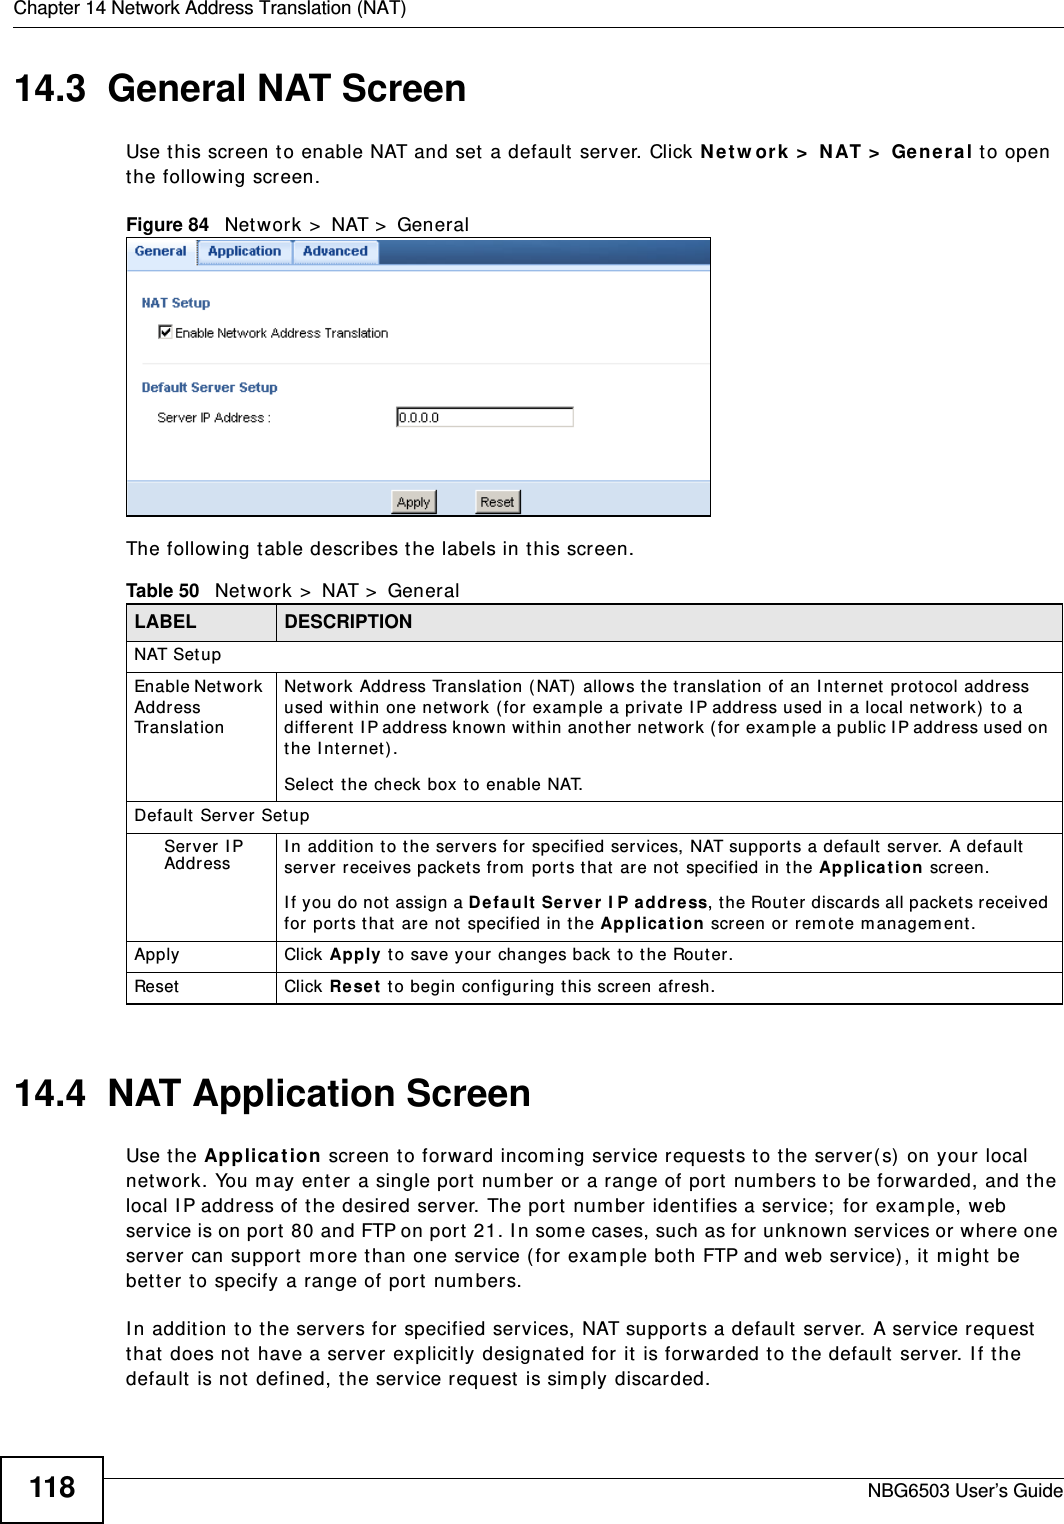 Chapter 14 Network Address Translation (NAT)NBG6503 User’s Guide11814.3  General NAT ScreenUse this screen to enable NAT and set a default server. Click Network &gt; NAT &gt; General to open the following screen.Figure 84   Network &gt; NAT &gt; General The following table describes the labels in this screen.14.4  NAT Application Screen   Use the Application screen to forward incoming service requests to the server(s) on your local network. You may enter a single port number or a range of port numbers to be forwarded, and the local IP address of the desired server. The port number identifies a service; for example, web service is on port 80 and FTP on port 21. In some cases, such as for unknown services or where one server can support more than one service (for example both FTP and web service), it might be better to specify a range of port numbers.In addition to the servers for specified services, NAT supports a default server. A service request that does not have a server explicitly designated for it is forwarded to the default server. If the default is not defined, the service request is simply discarded.Table 50   Network &gt; NAT &gt; GeneralLABEL DESCRIPTIONNAT SetupEnable Network Address TranslationNetwork Address Translation (NAT) allows the translation of an Internet protocol address used within one network (for example a private IP address used in a local network) to a different IP address known within another network (for example a public IP address used on the Internet). Select the check box to enable NAT.Default Server SetupServer IP Address In addition to the servers for specified services, NAT supports a default server. A default server receives packets from ports that are not specified in the Application screen. If you do not assign a Default Server IP address, the Router discards all packets received for ports that are not specified in the Application screen or remote management.Apply Click Apply to save your changes back to the Router.Reset Click Reset to begin configuring this screen afresh.